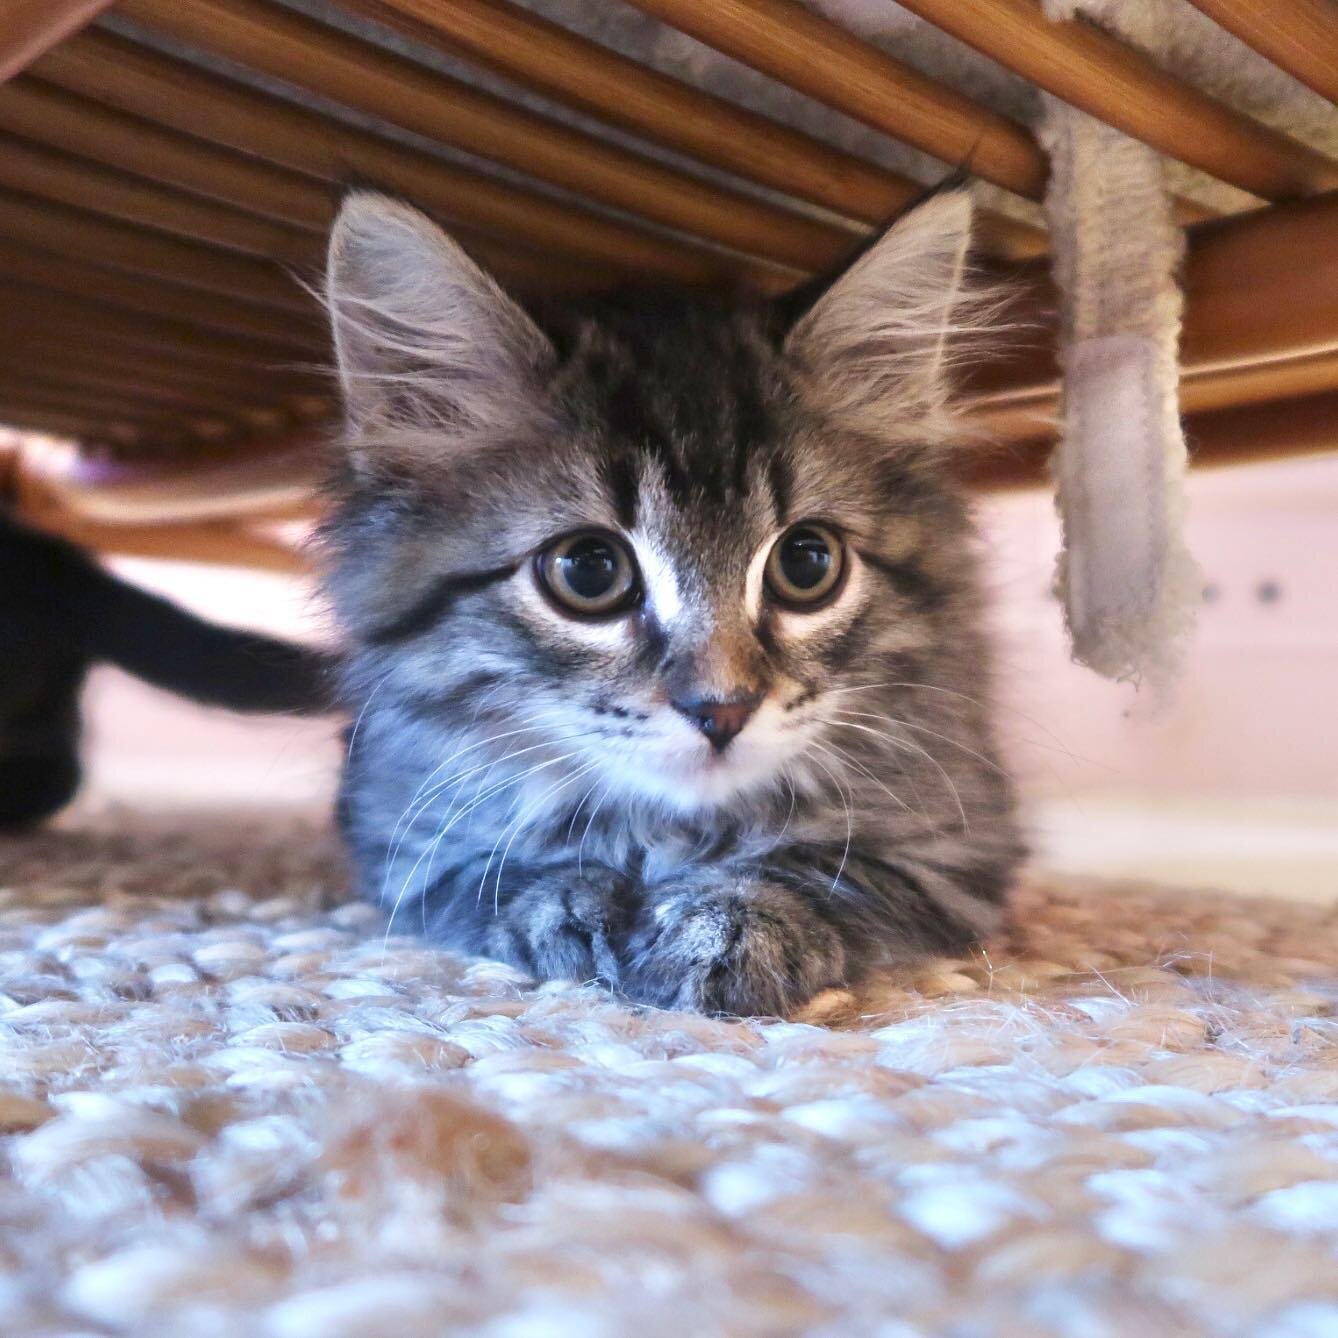 Pov: your toes😼

Lyra is our new employee of the month from @del.gato.rescue and available for adoption.

💒 Sweet Streets Cats is a 501(c)(3) nonprofit foster program for street cats in a sweet workspace. 🍭🍬 Meet our employees of the month! 🐈

?